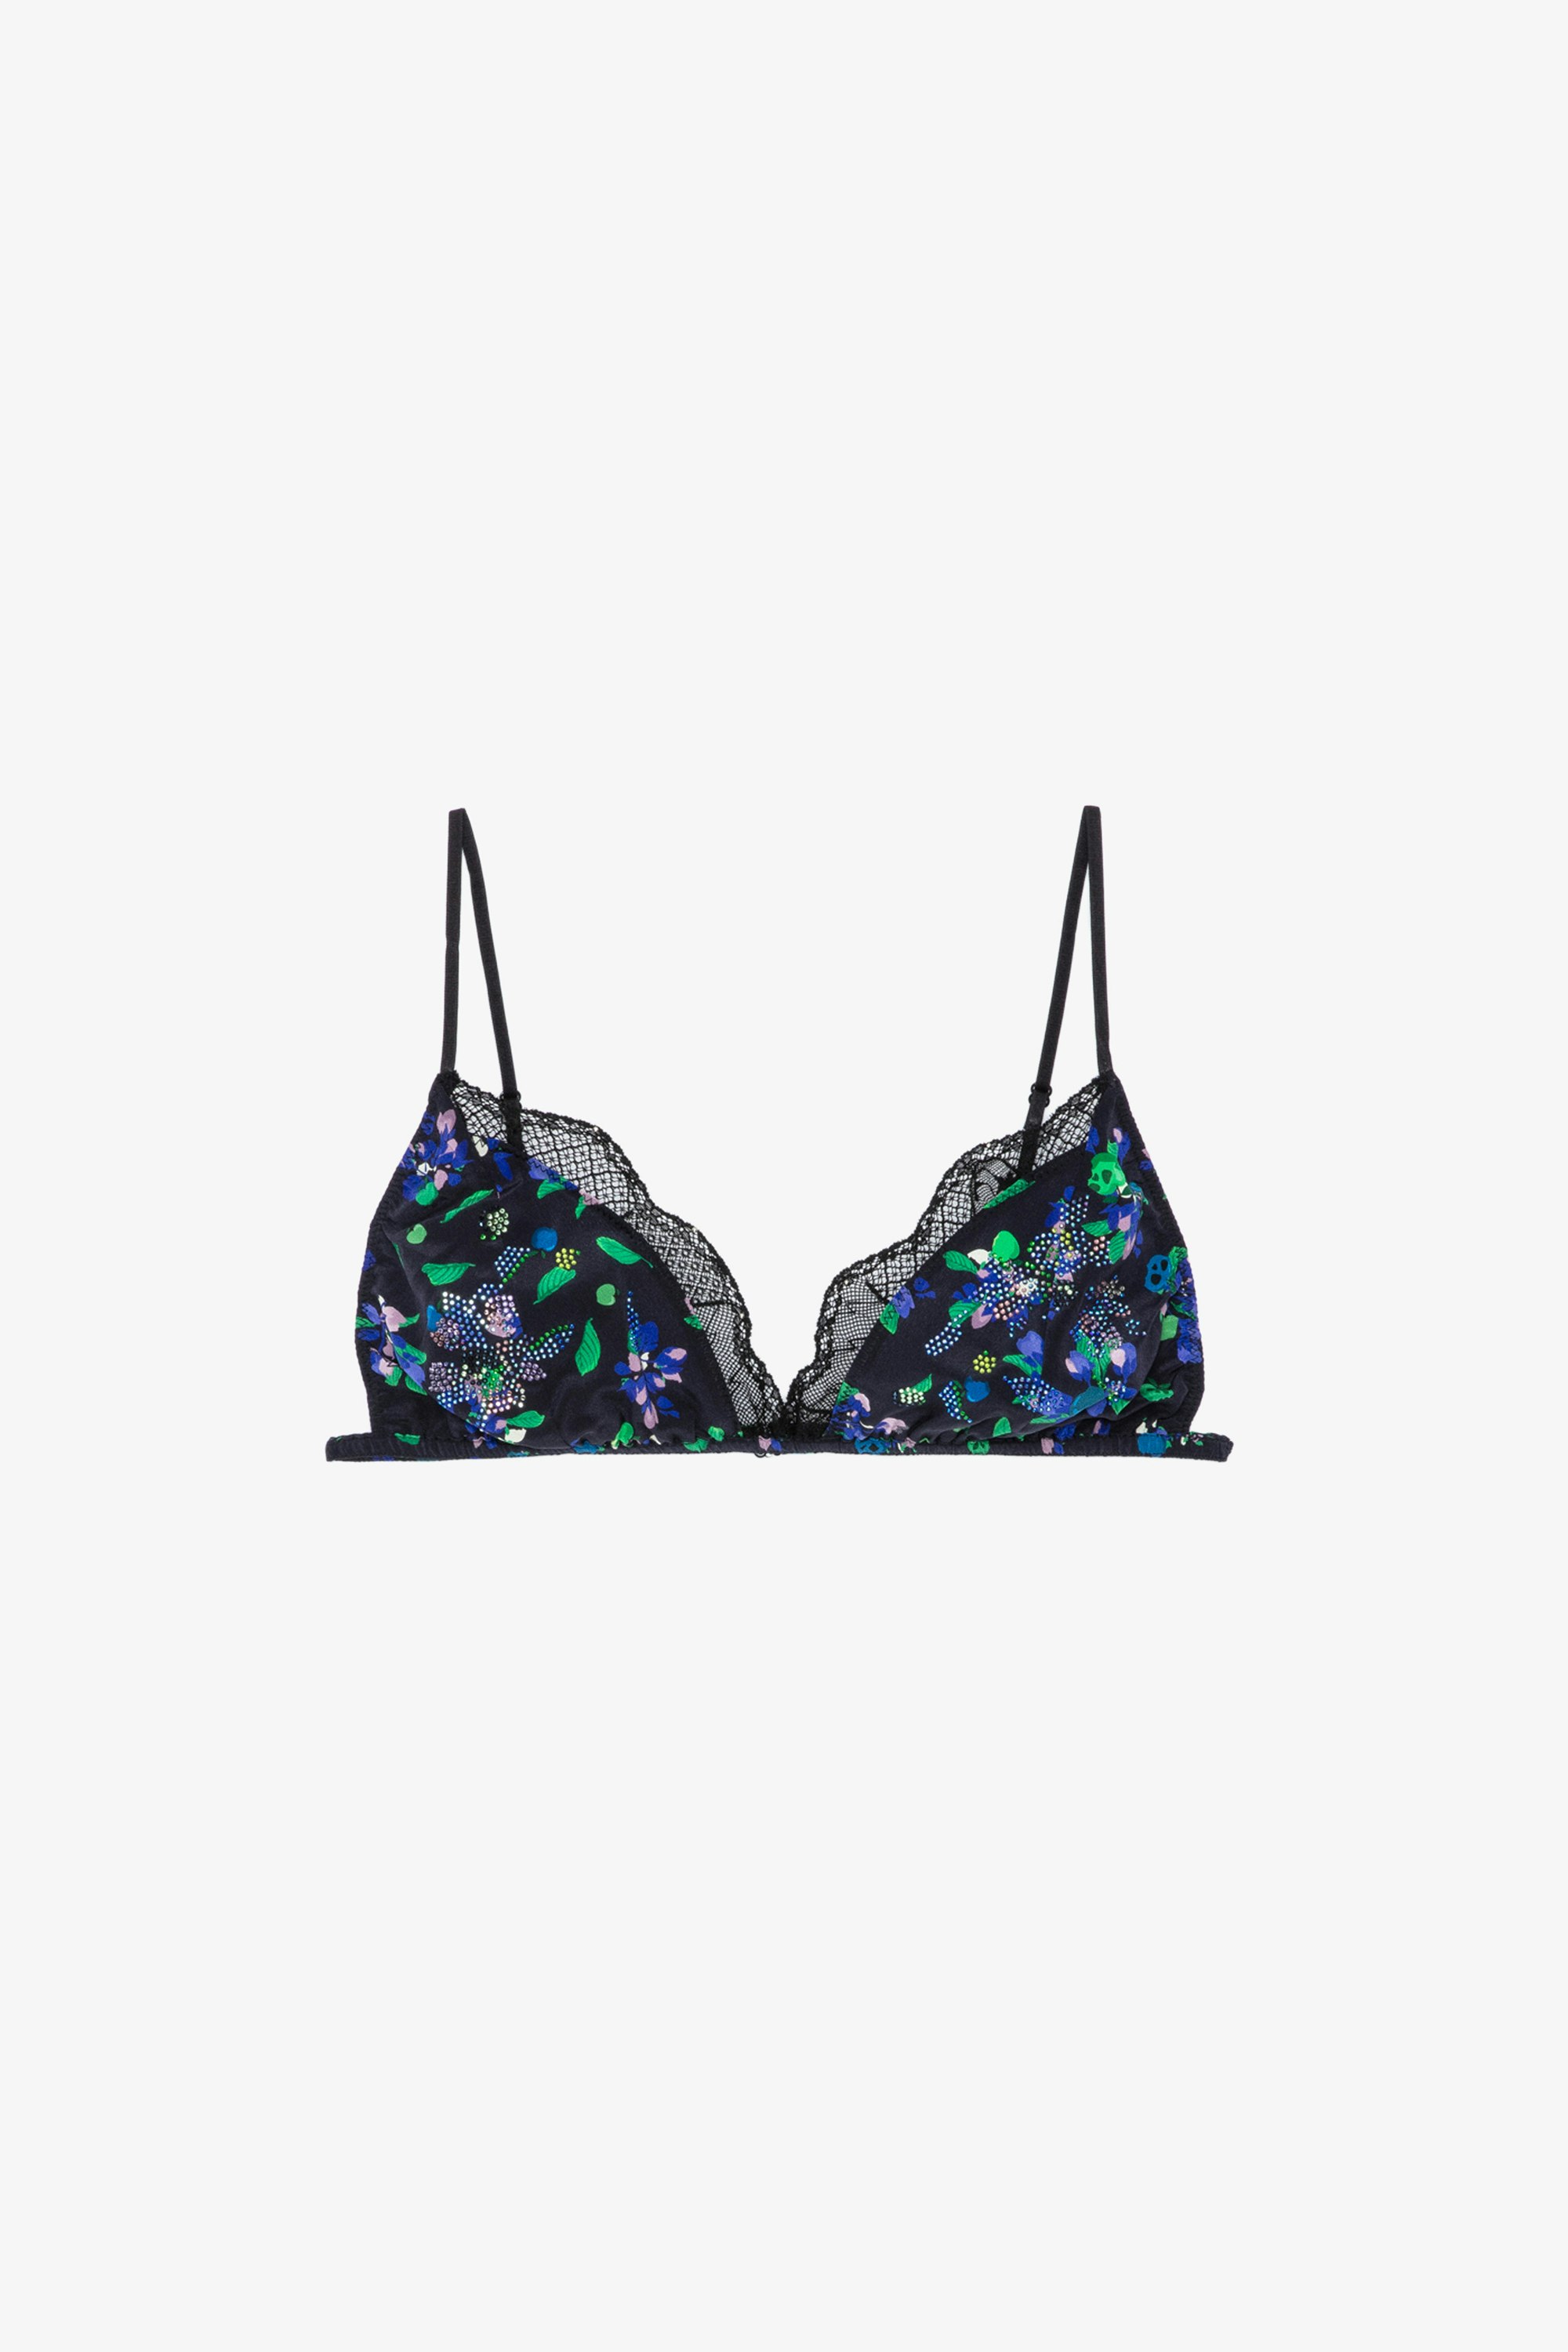 Bianca Silk Bra Women’s black silk triangle bra with floral motifs, crystals and lace